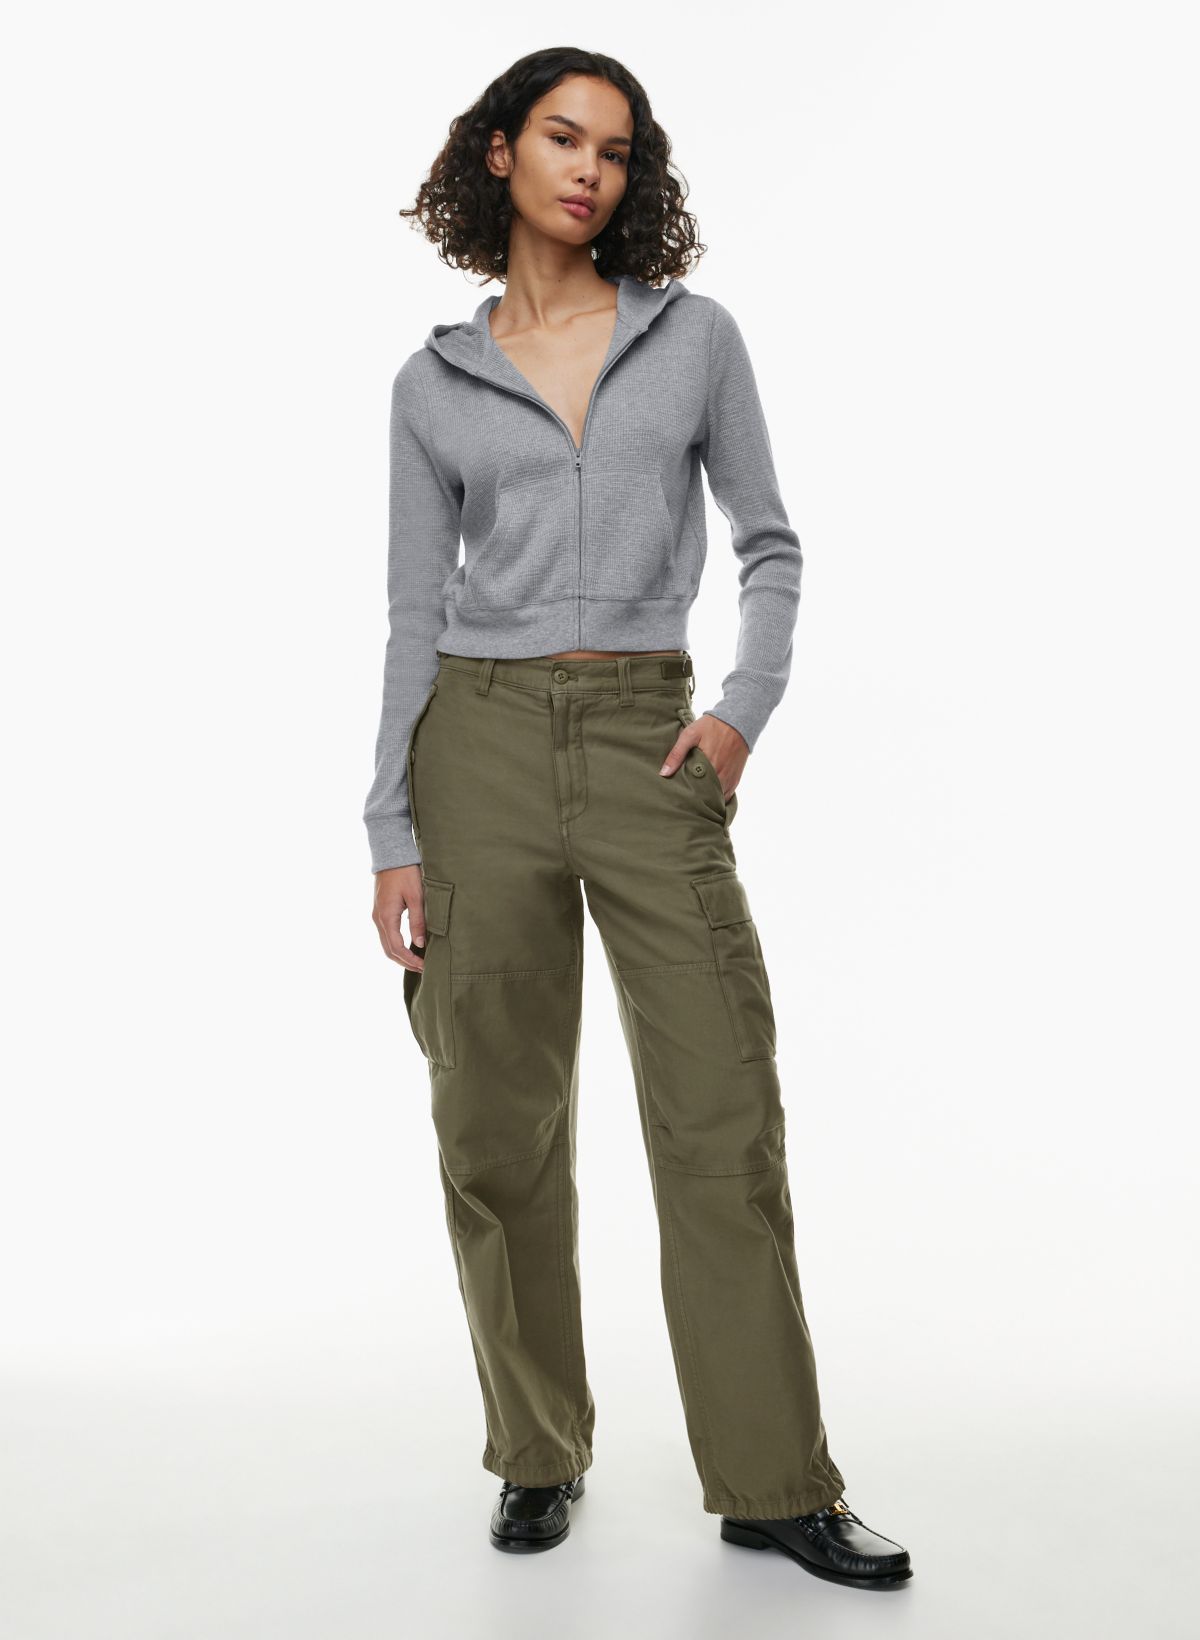 Fashionable Army Cargo Pants and Black Camisole